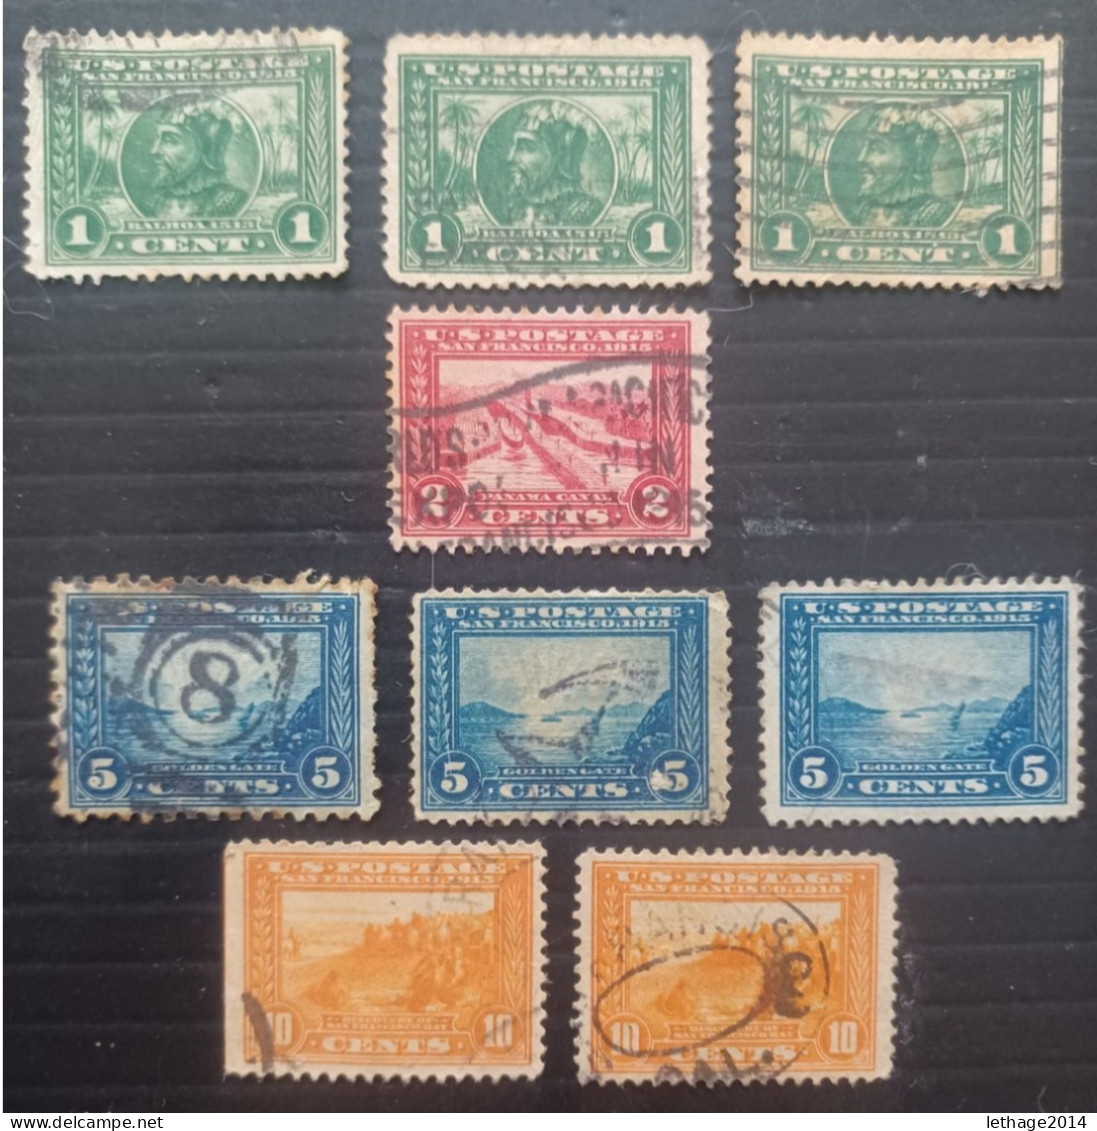 UNITED STATE 1913 PANAMA PACIFIC EXPOSITION SC N 397-398-399-400 DIFFERENT PERFORATIONS - Oblitérés